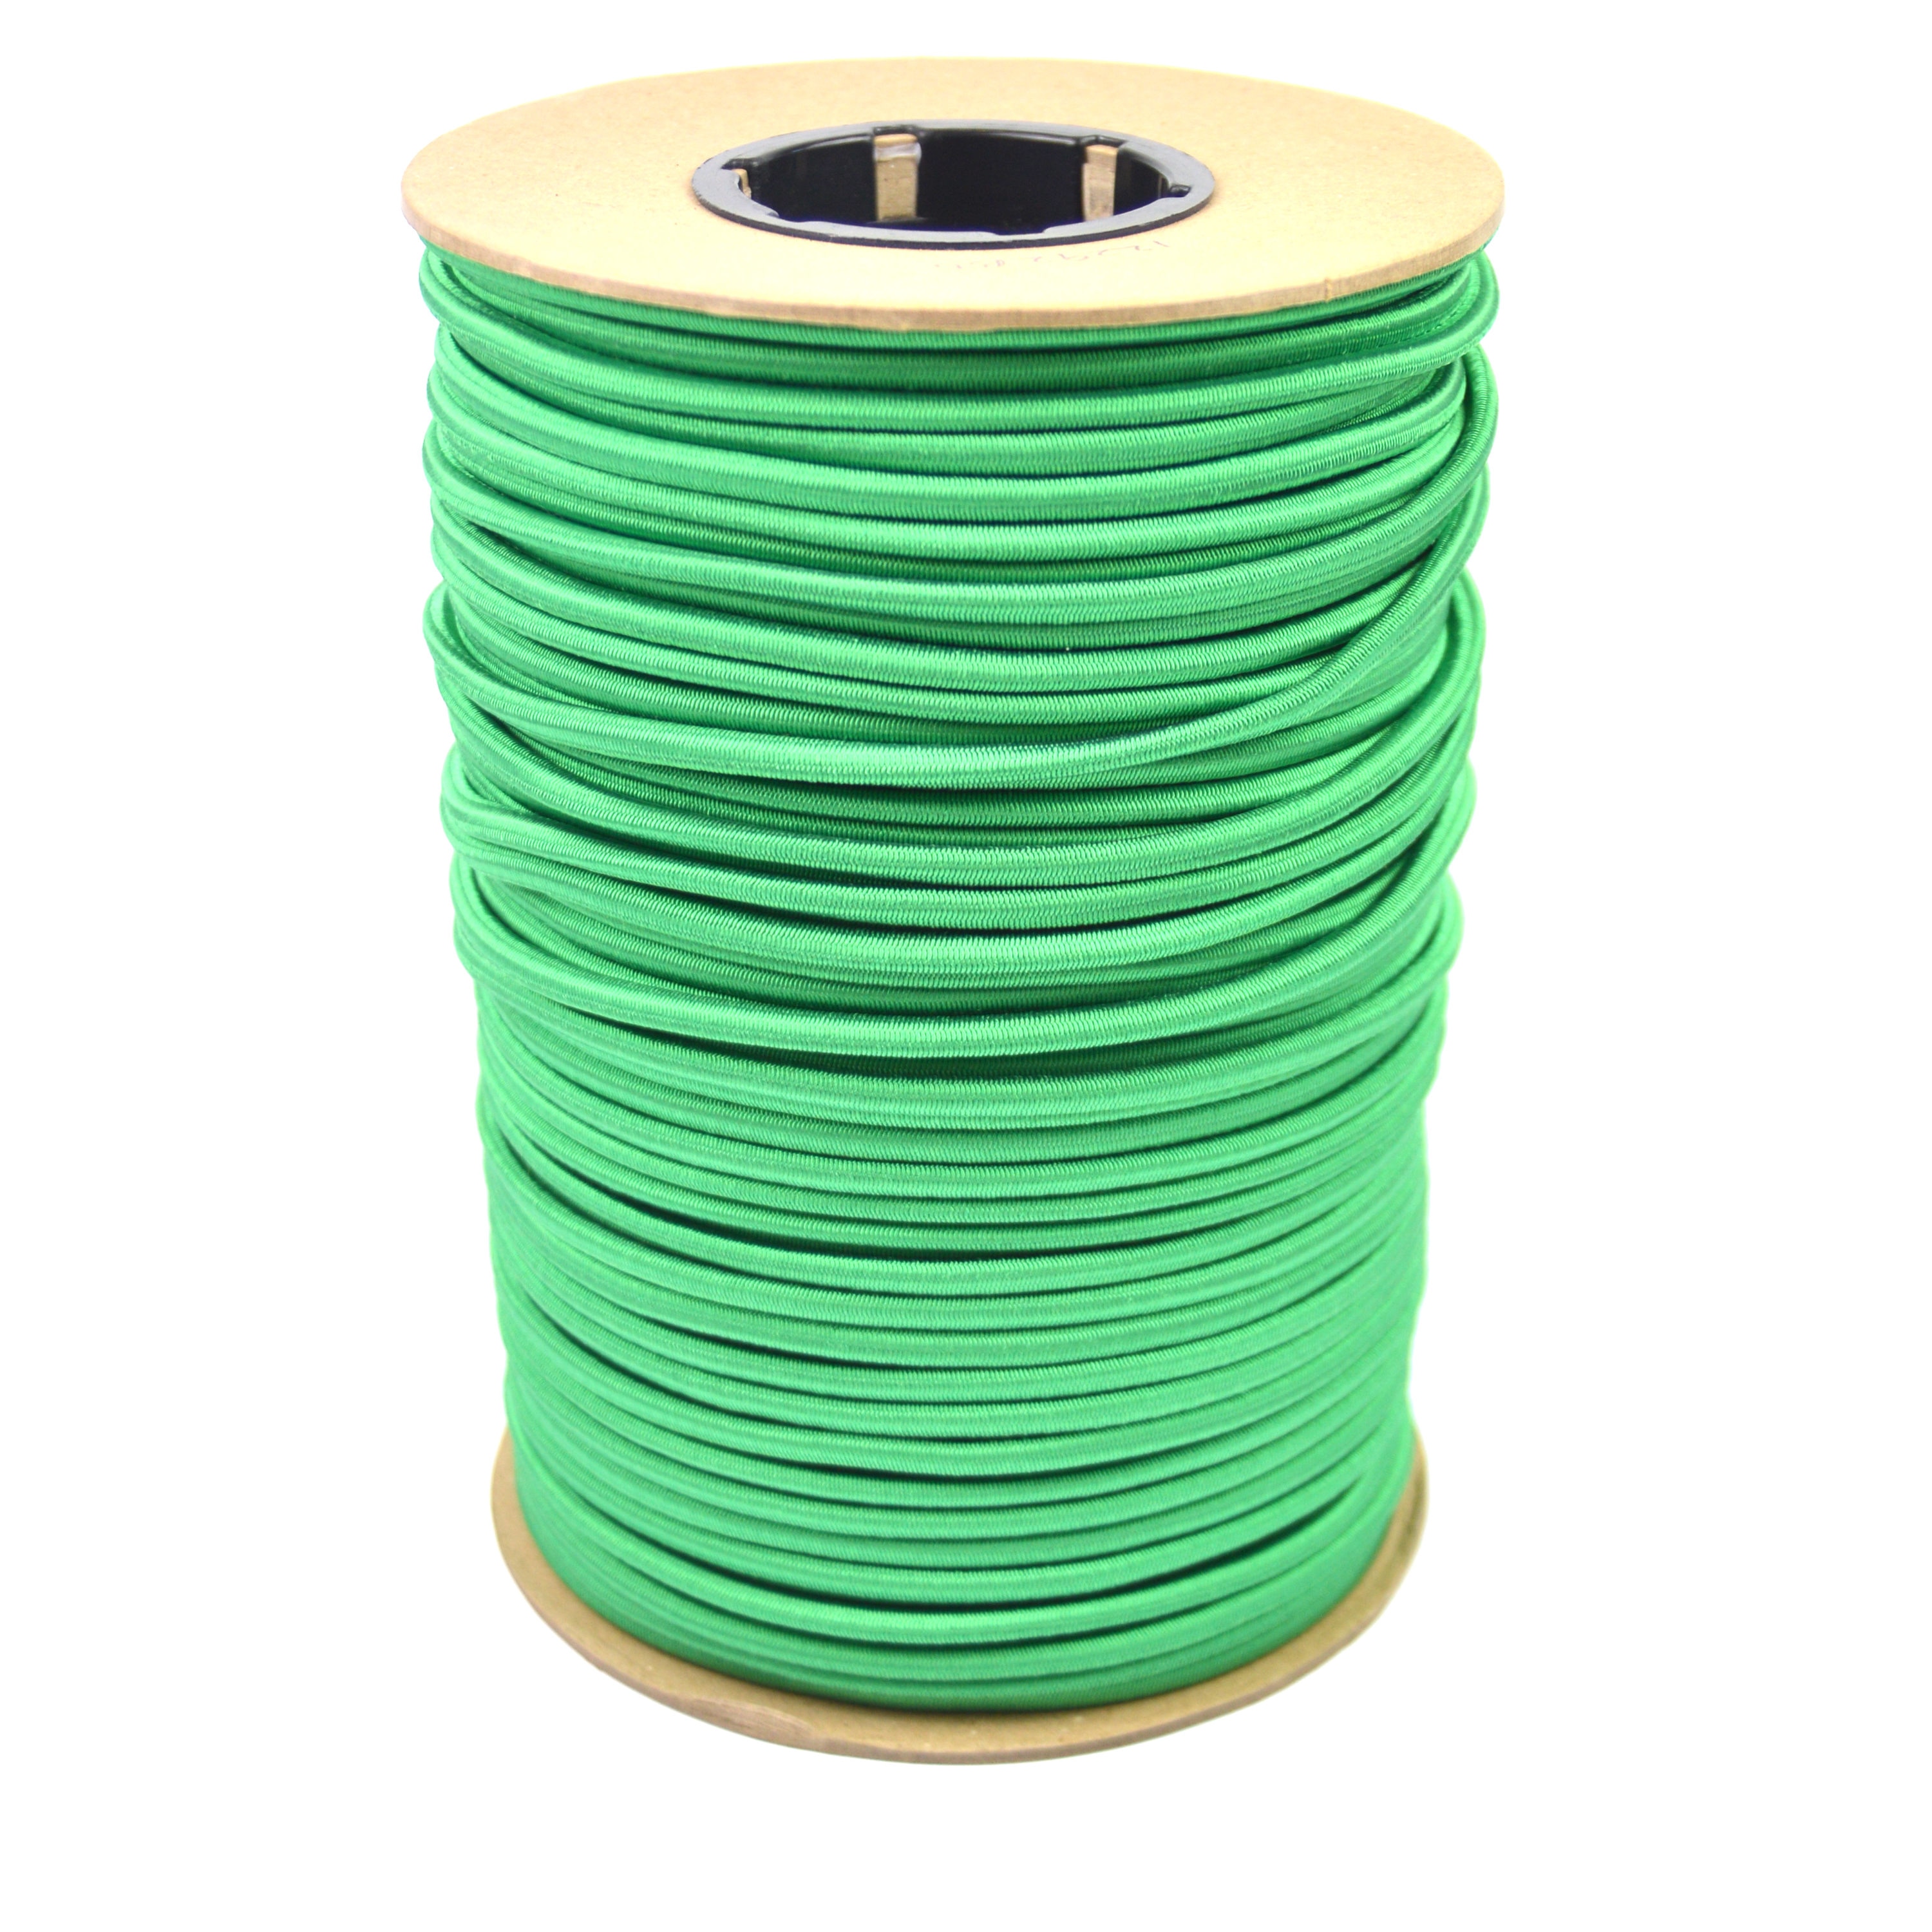 100ft 1/4" Green Bungee Cord Marine Grade Heavy Duty Shock Rope Tie Down Stretch 